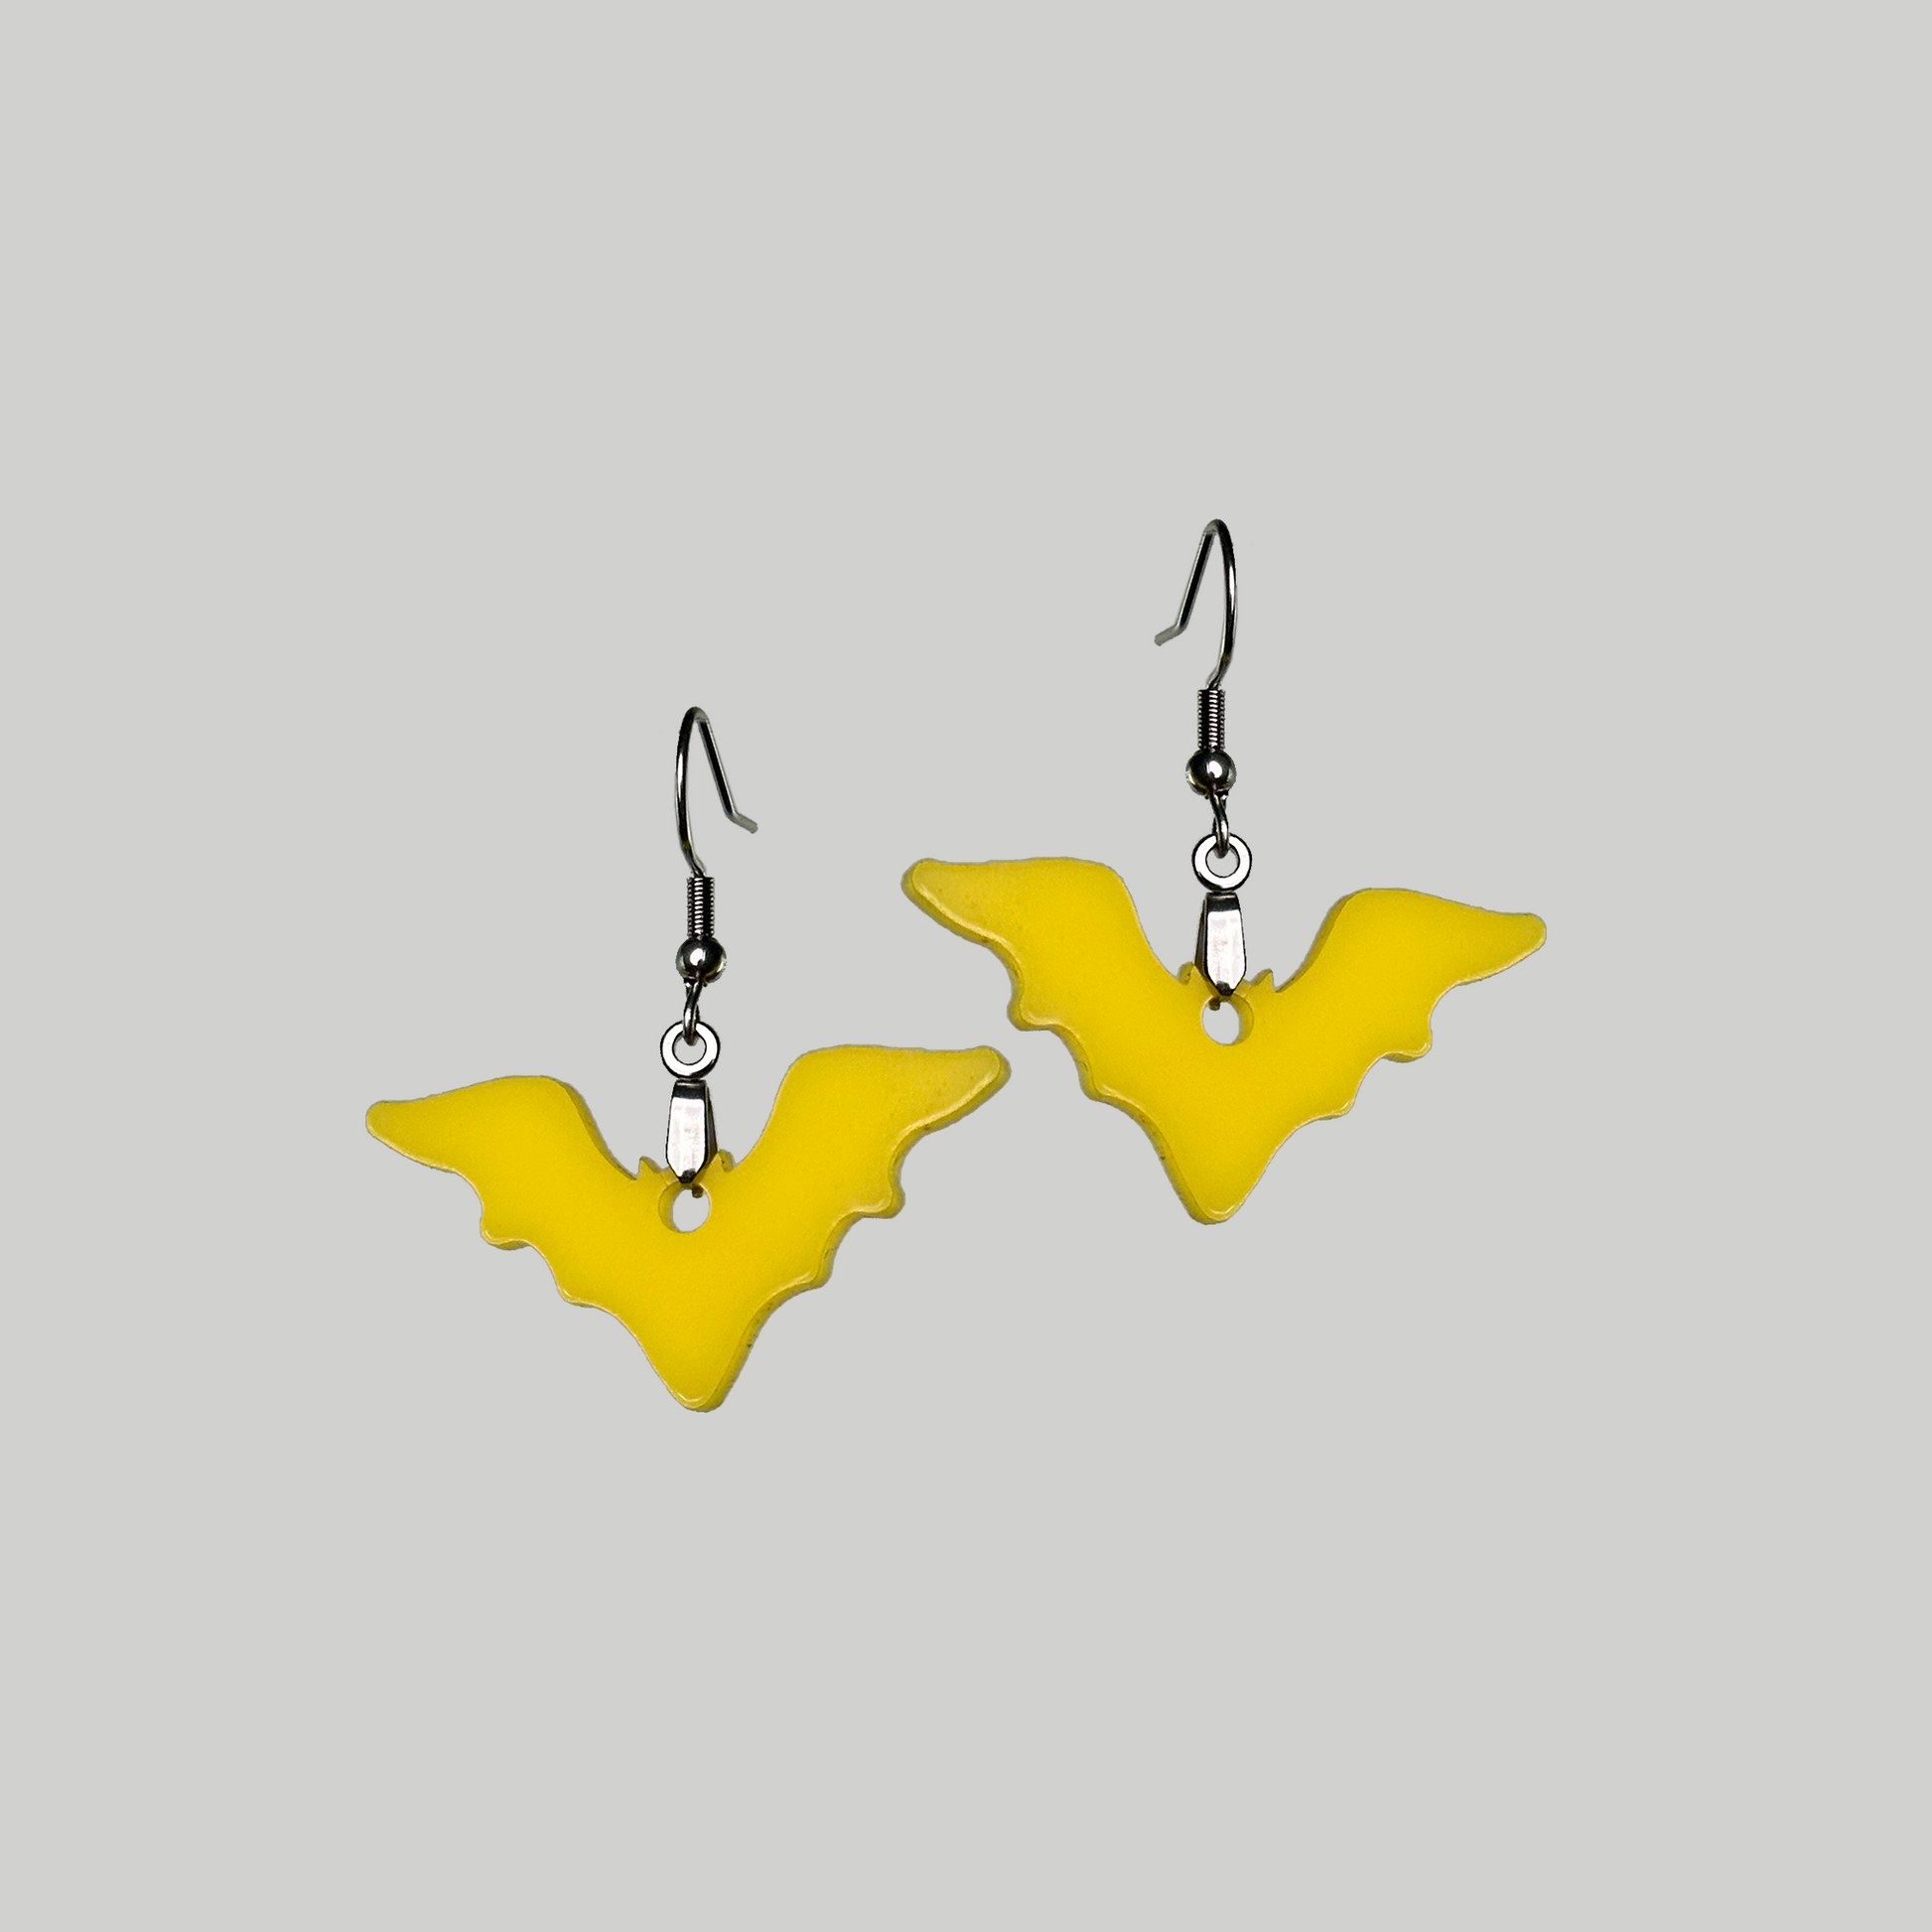 Midnight Winged Wonders: Embrace the dark side with these chic and mysterious bat earrings.